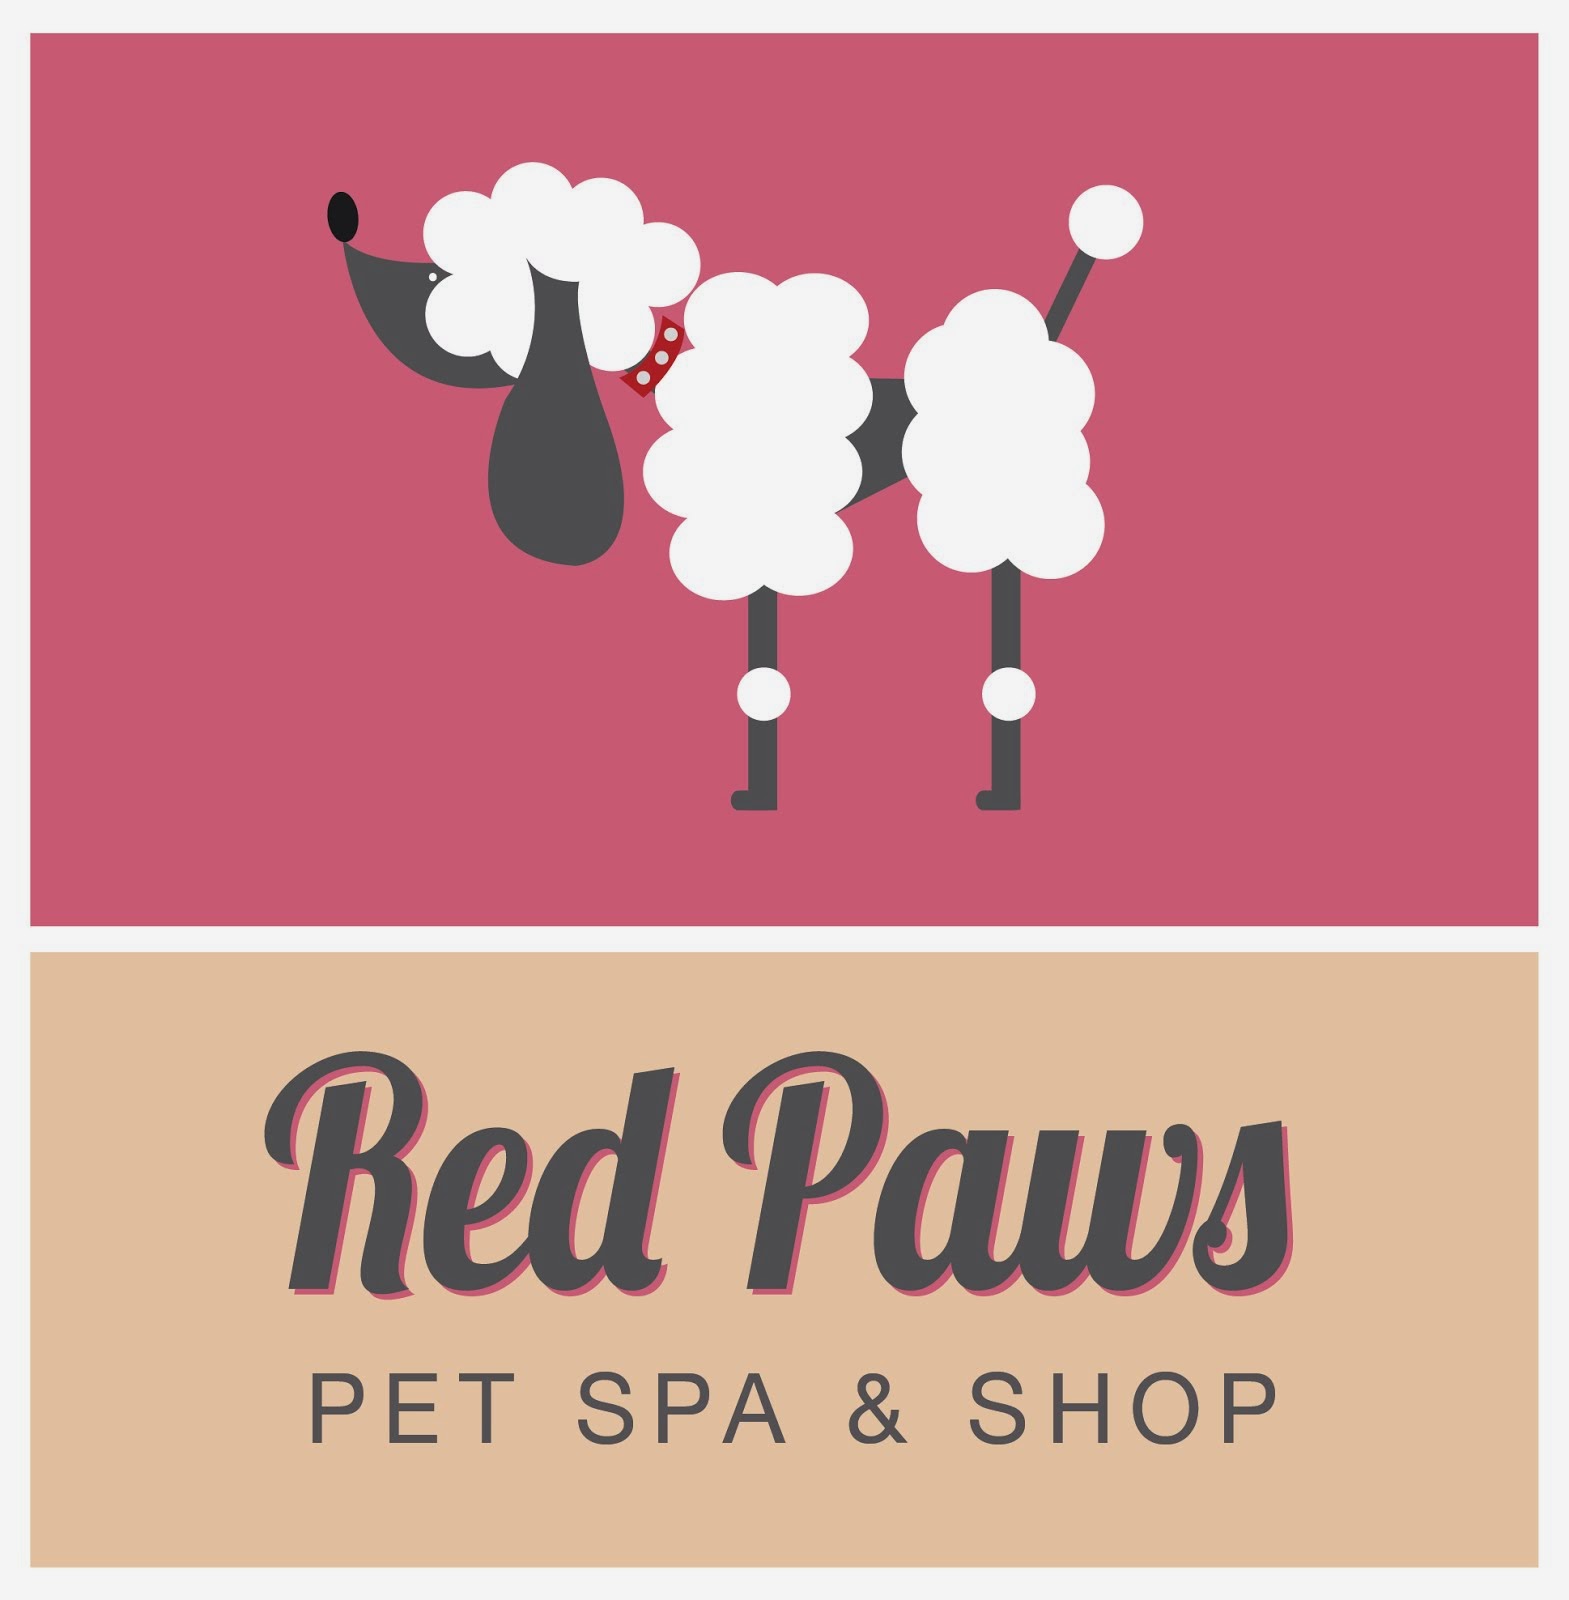 Red Paws Pet Spa & Shop